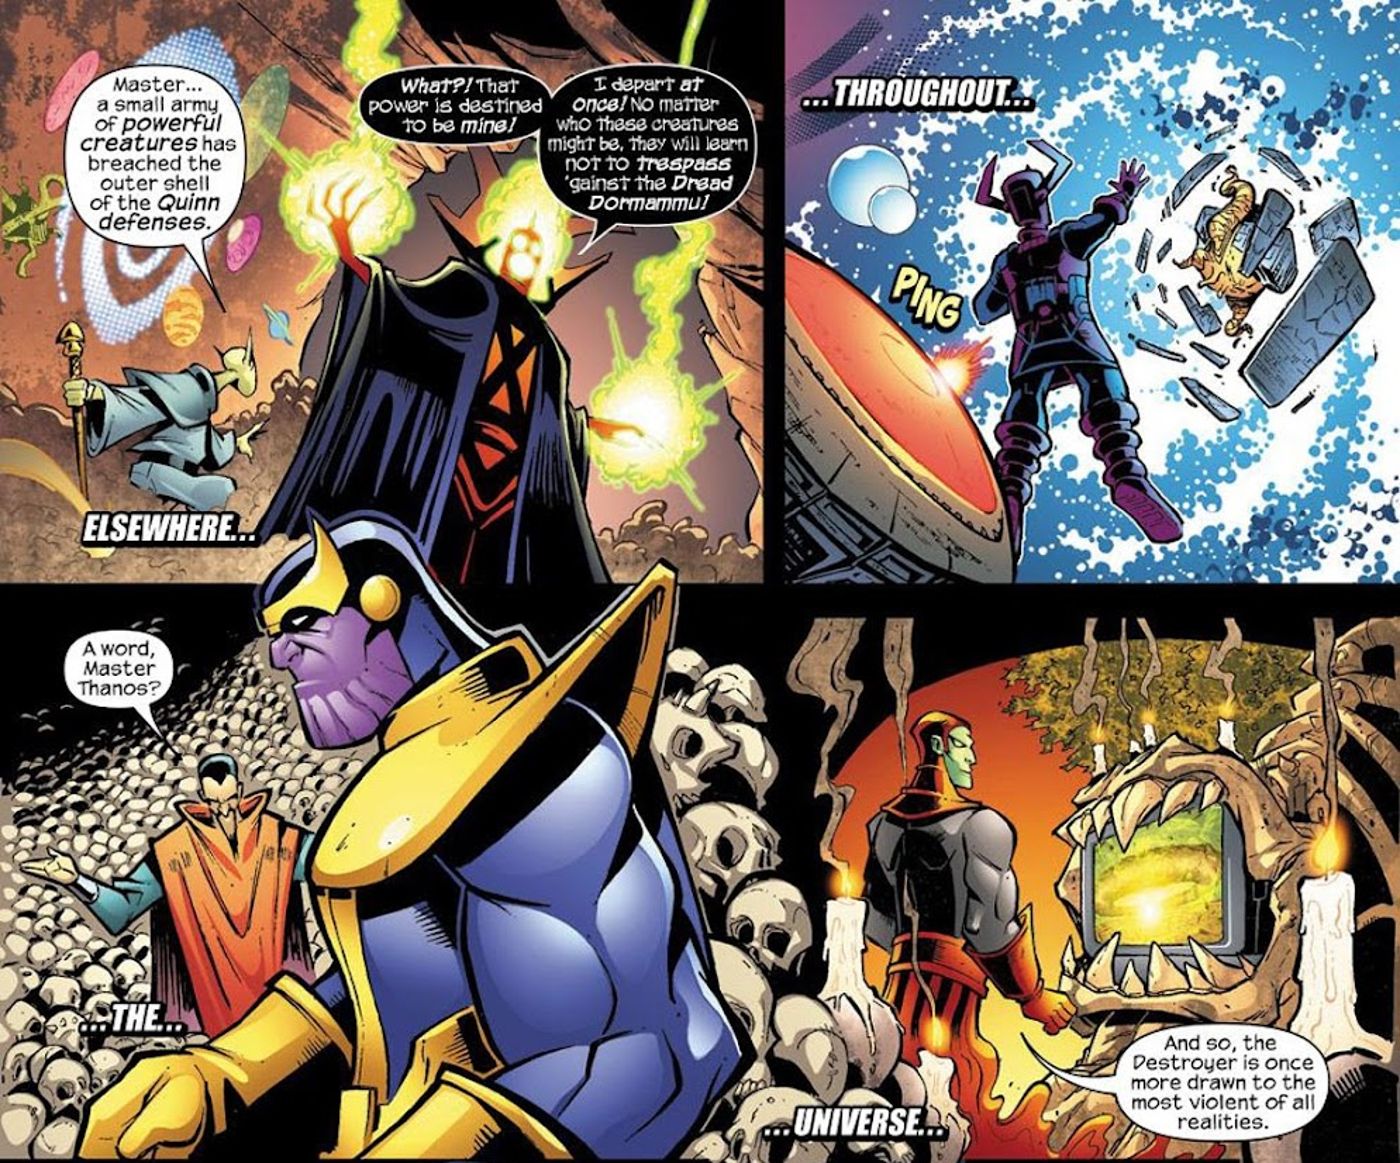 Dormammu, Thanos, and Galactus leave to thwart Doctor Doom from breeching Quinn's cell.